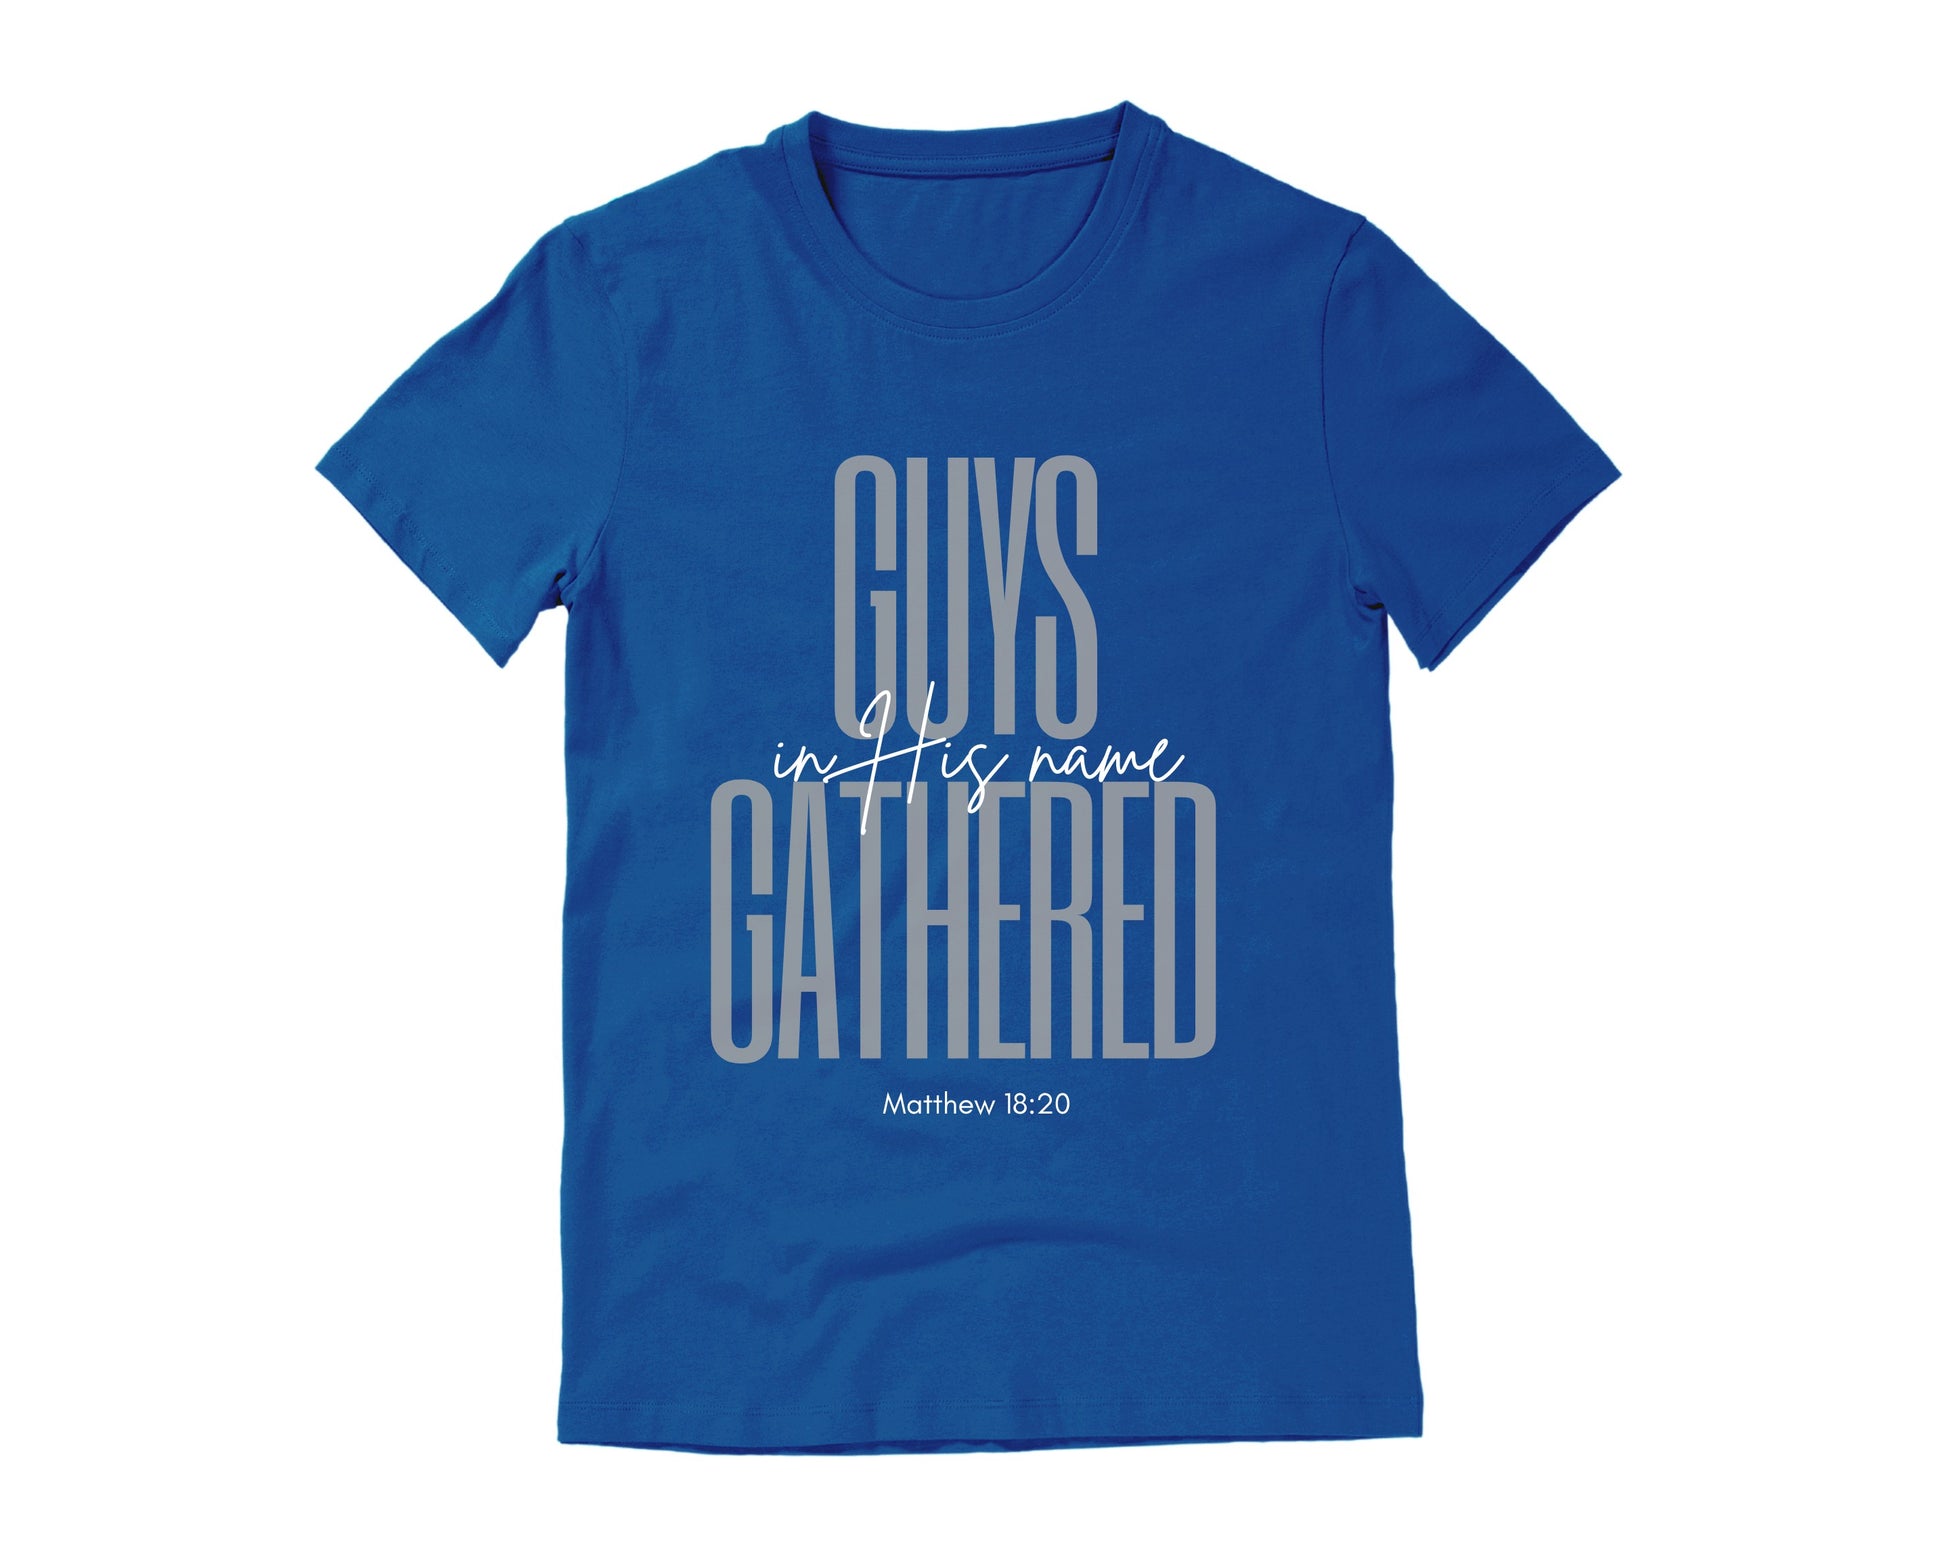 Christian boy small Life Group blue t-shirt with gray writing. 